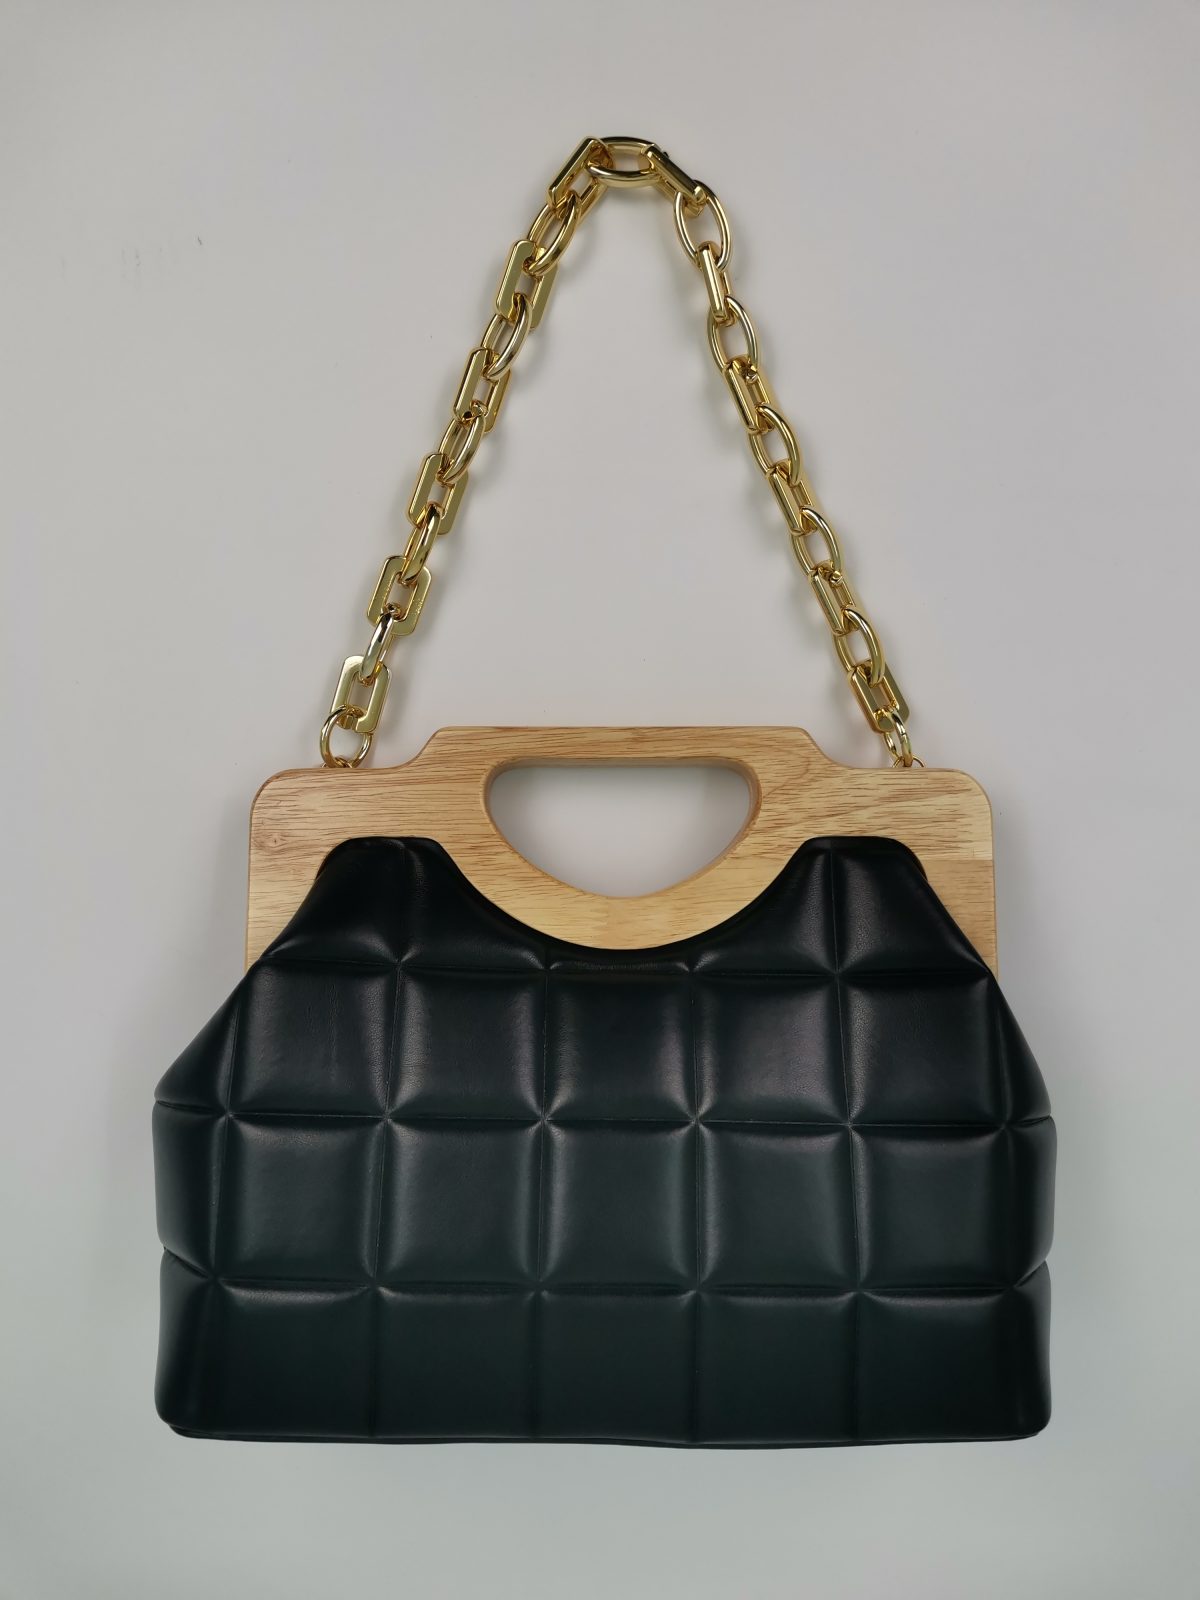 Black bag with wooden handle and gold chain